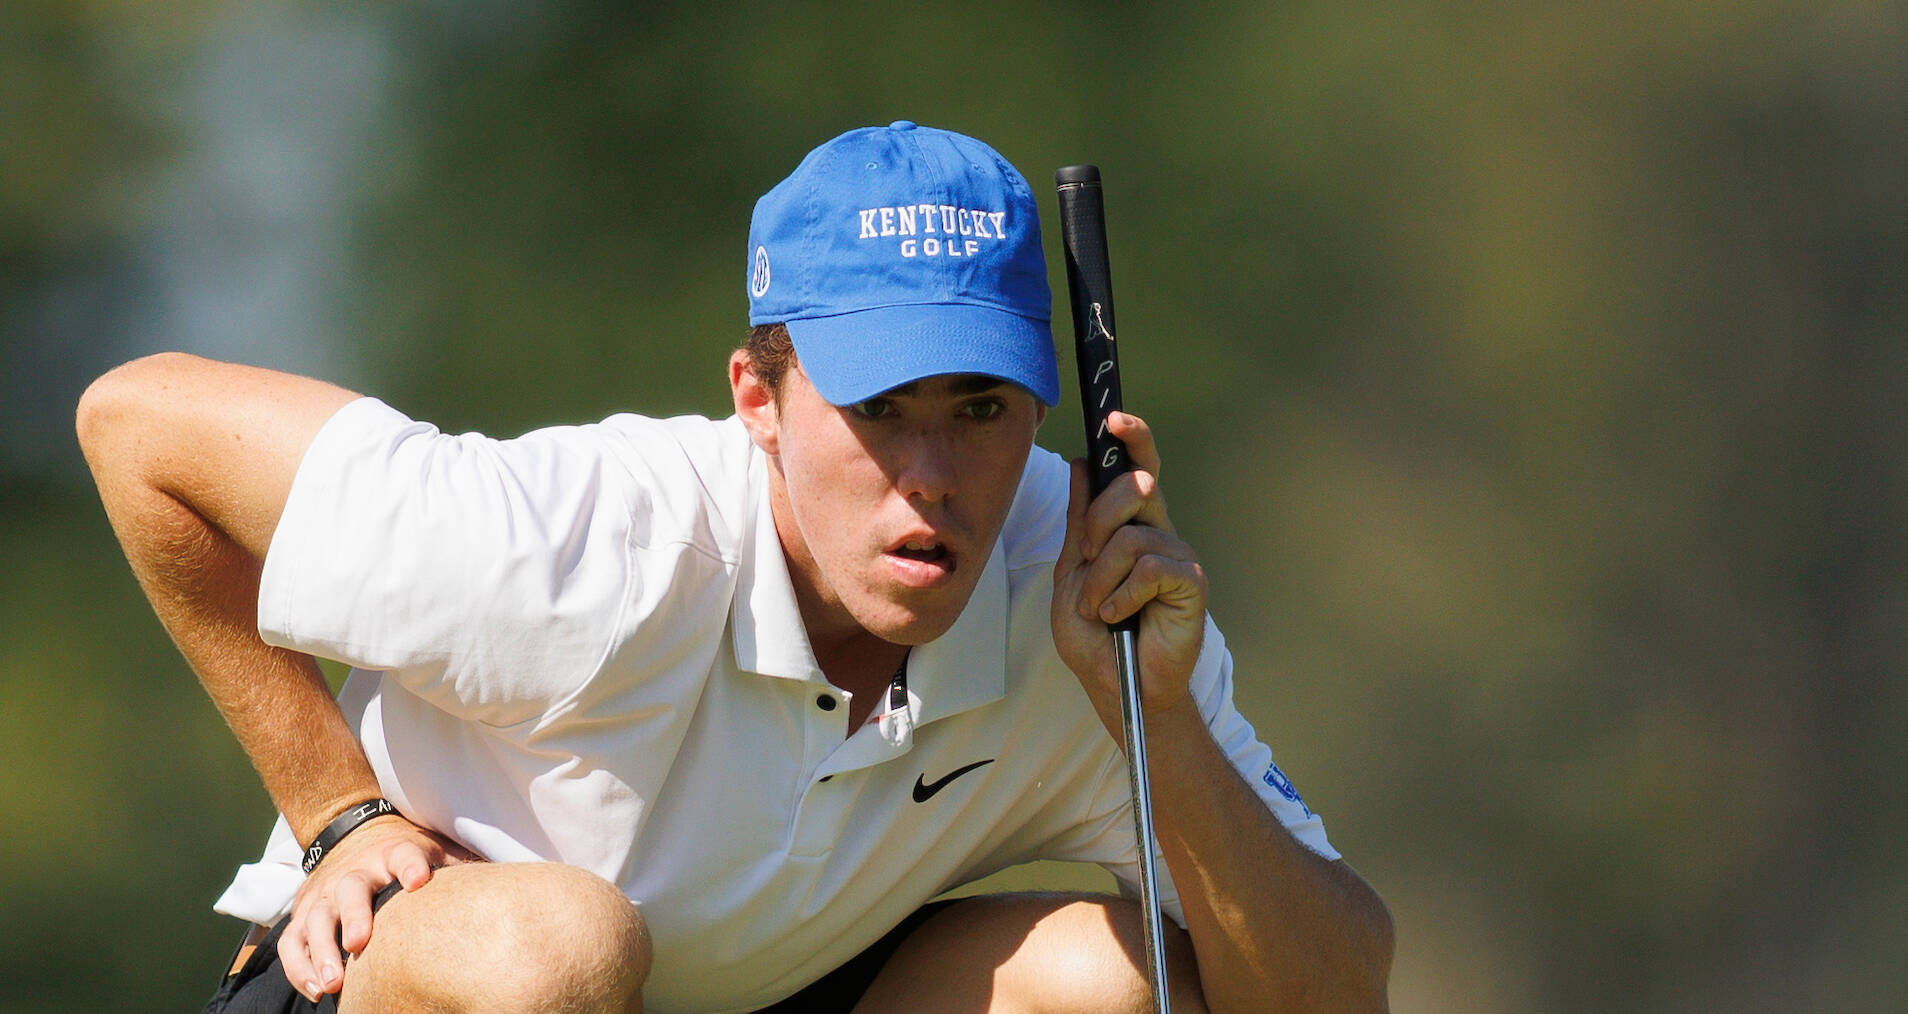 Wildcats Look to Finish Fall Strong at Hamptons Intercollegiate